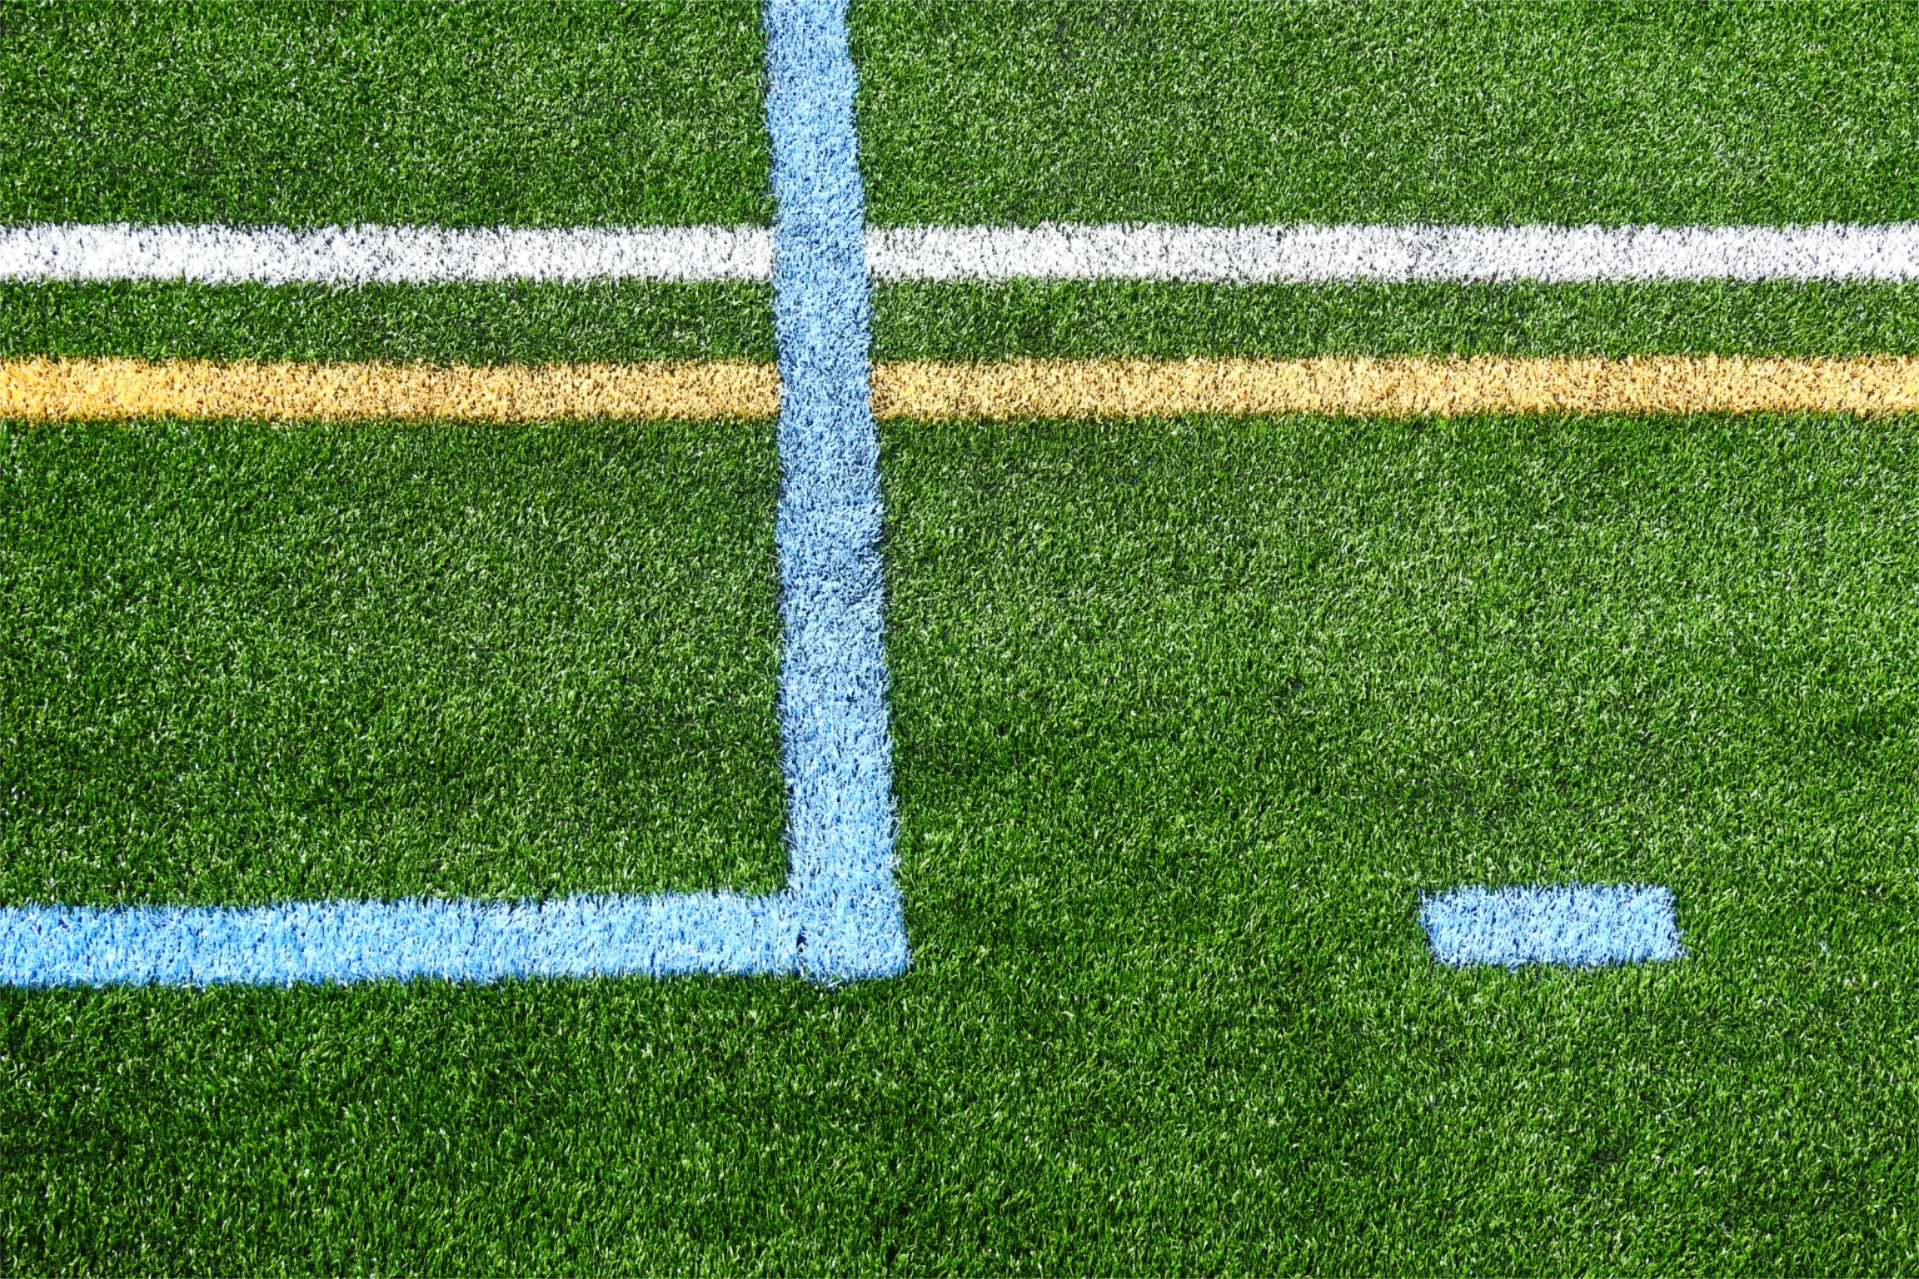 As Garcelon Field is a multi-sport facility, different colors indicate markings on the turf for different games. Most of these field graphics were sewn in by hand. (Jay Burns/Bates College)